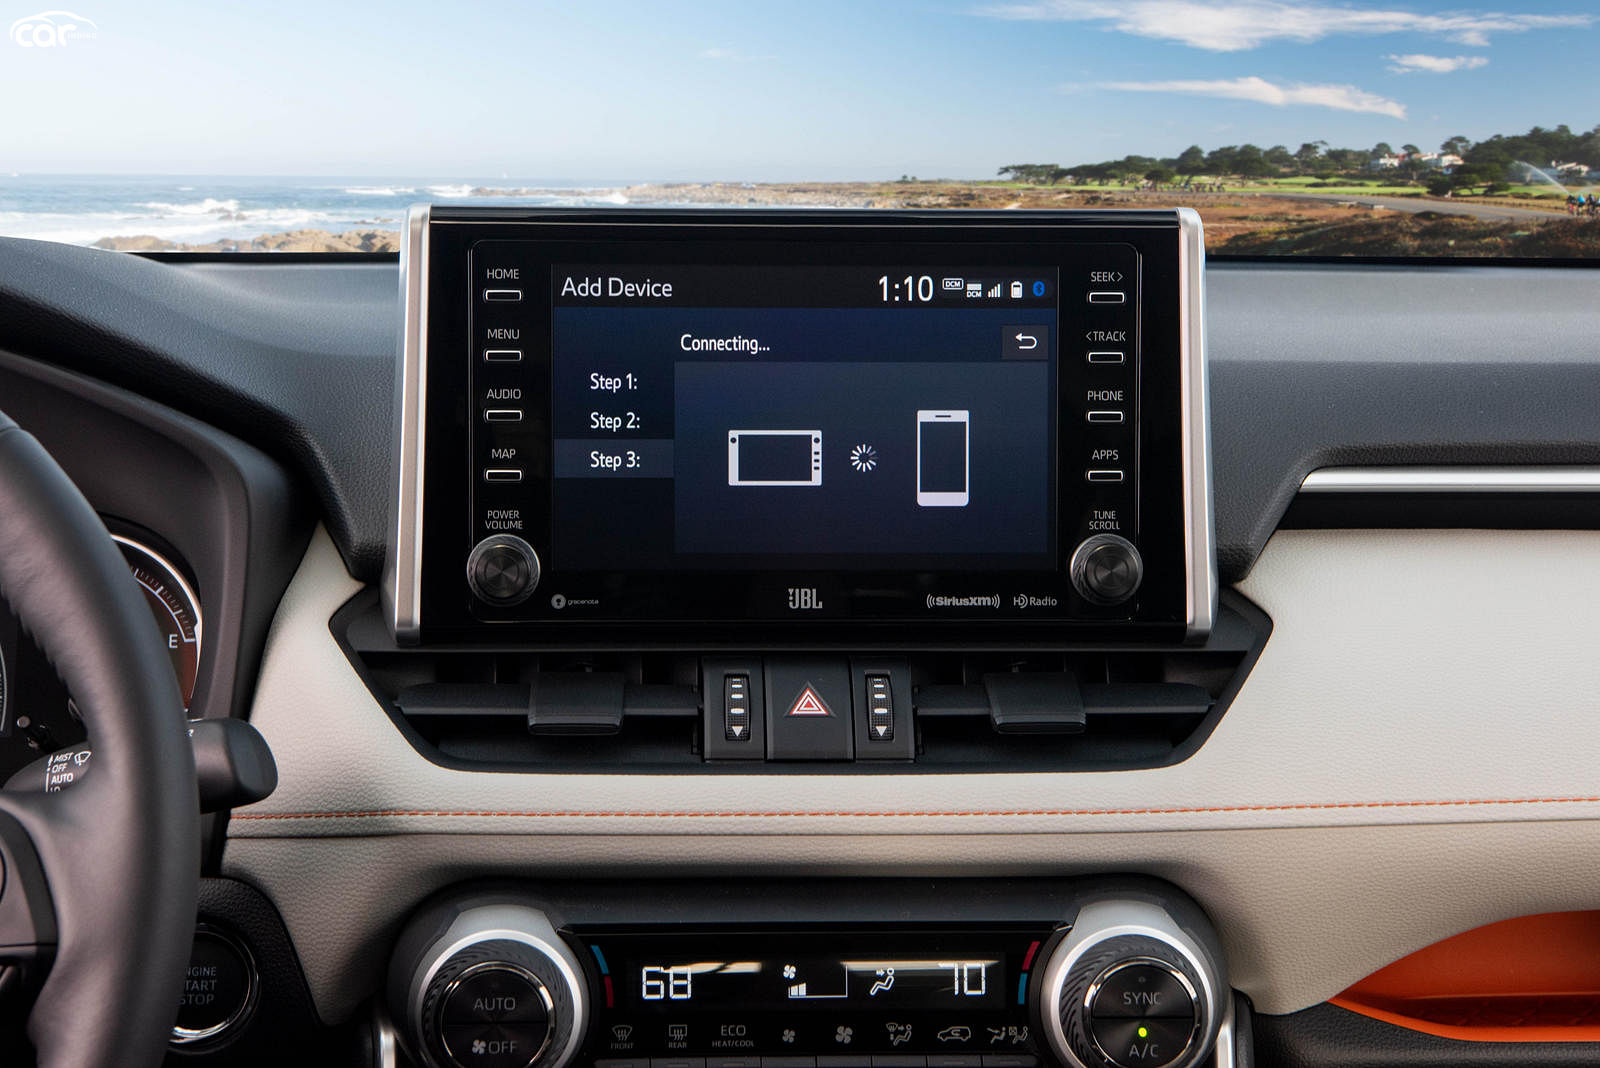 2022 Toyota RAV4 Interior Review Seating, Infotainment, Dashboard and